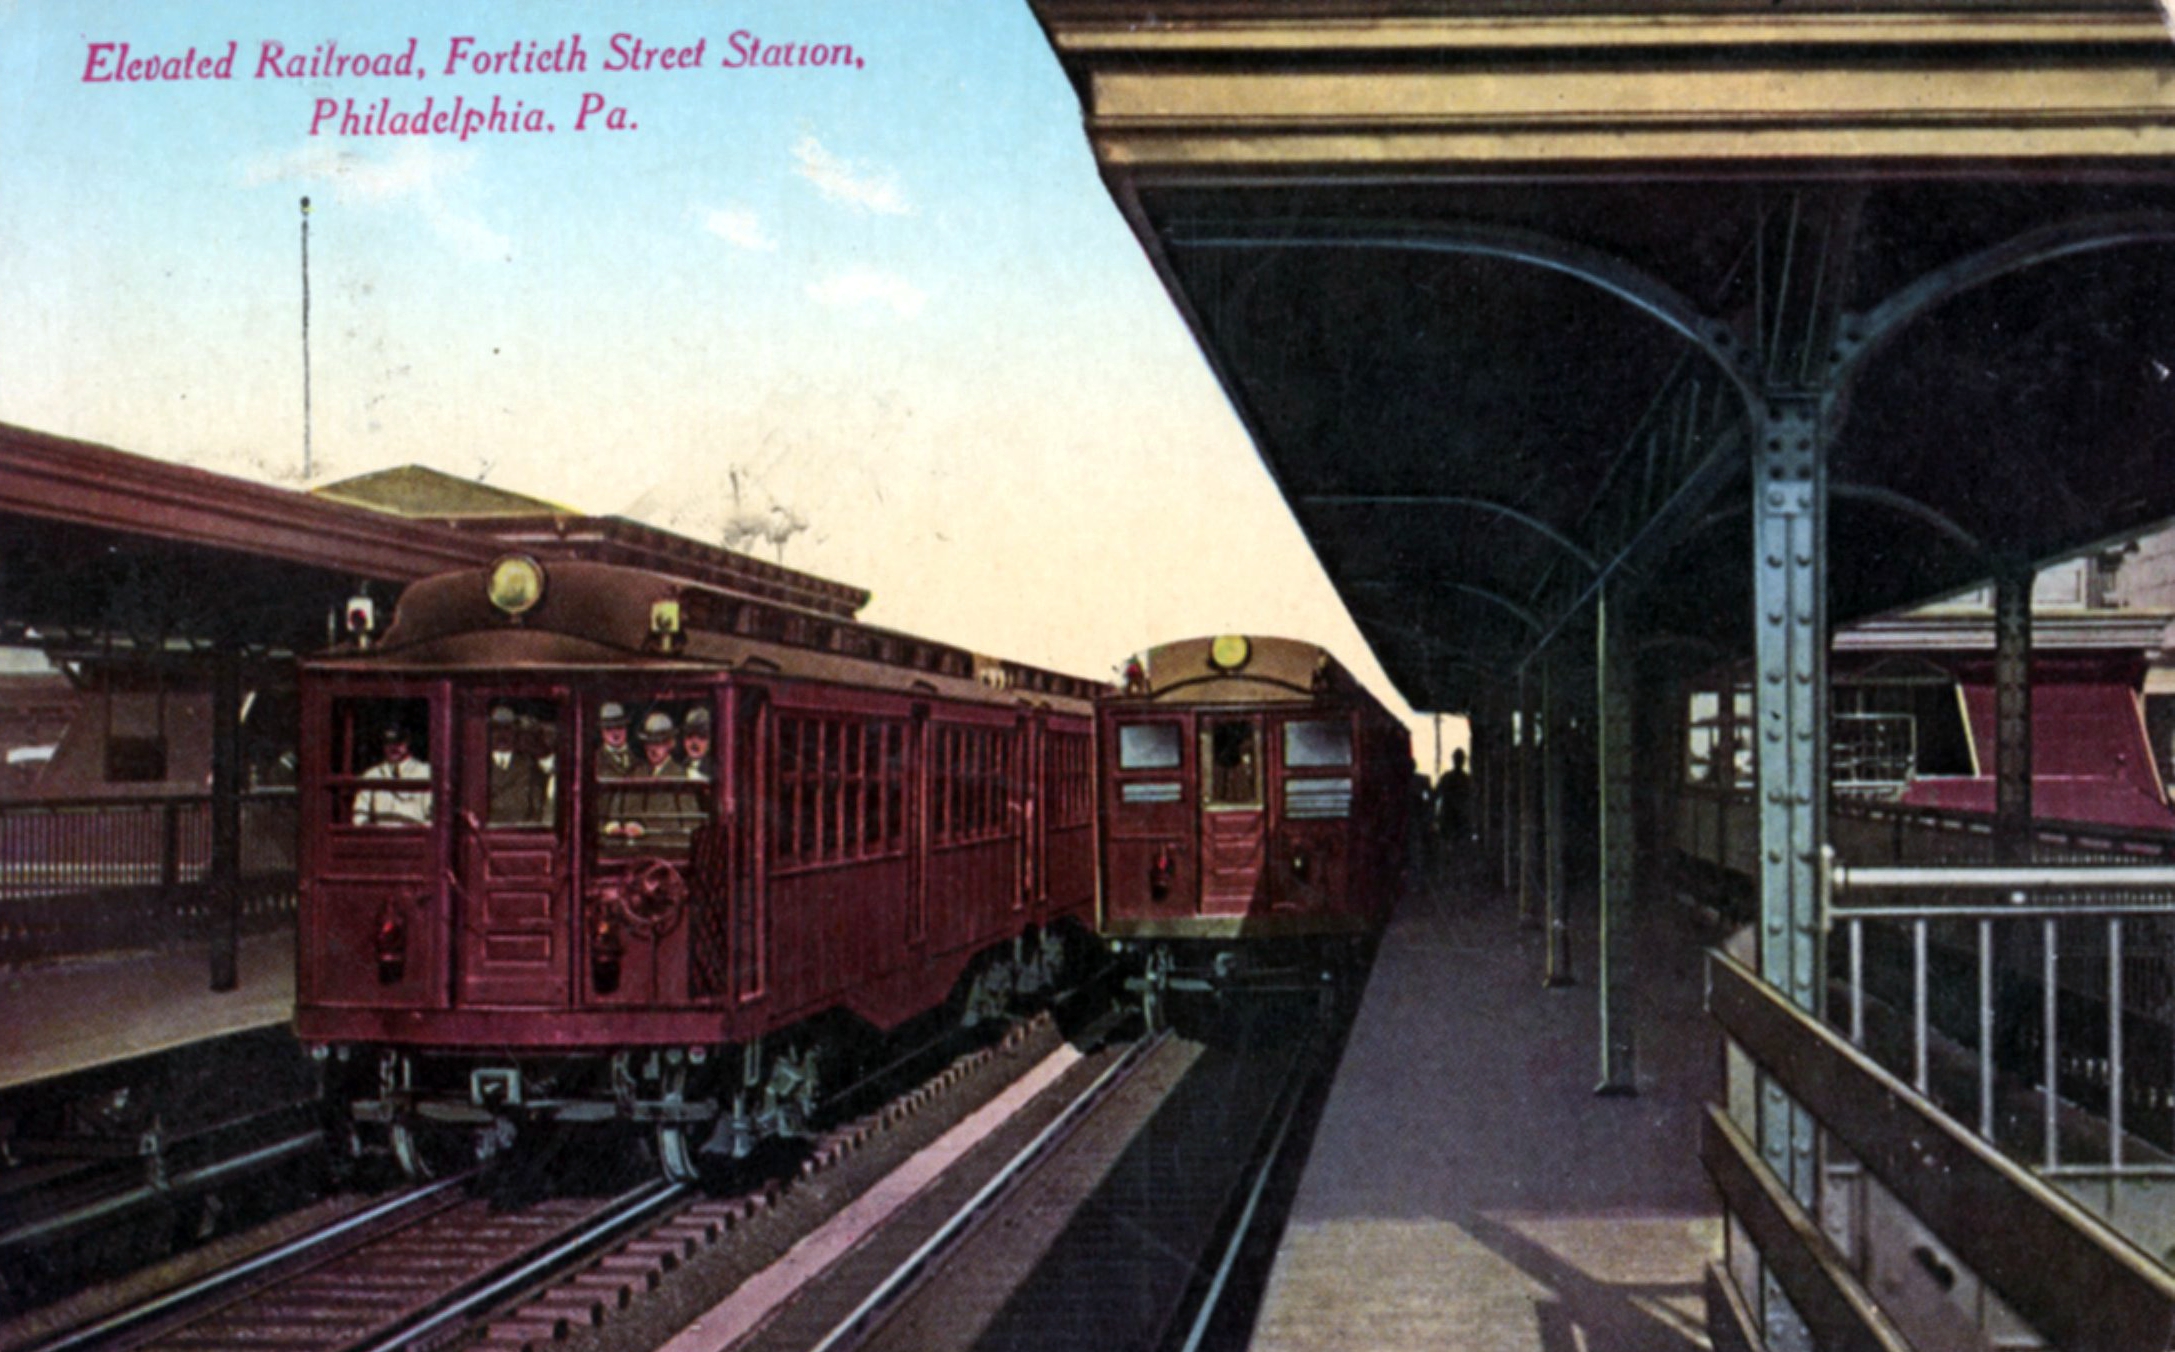 Two trains at elevated railroad station